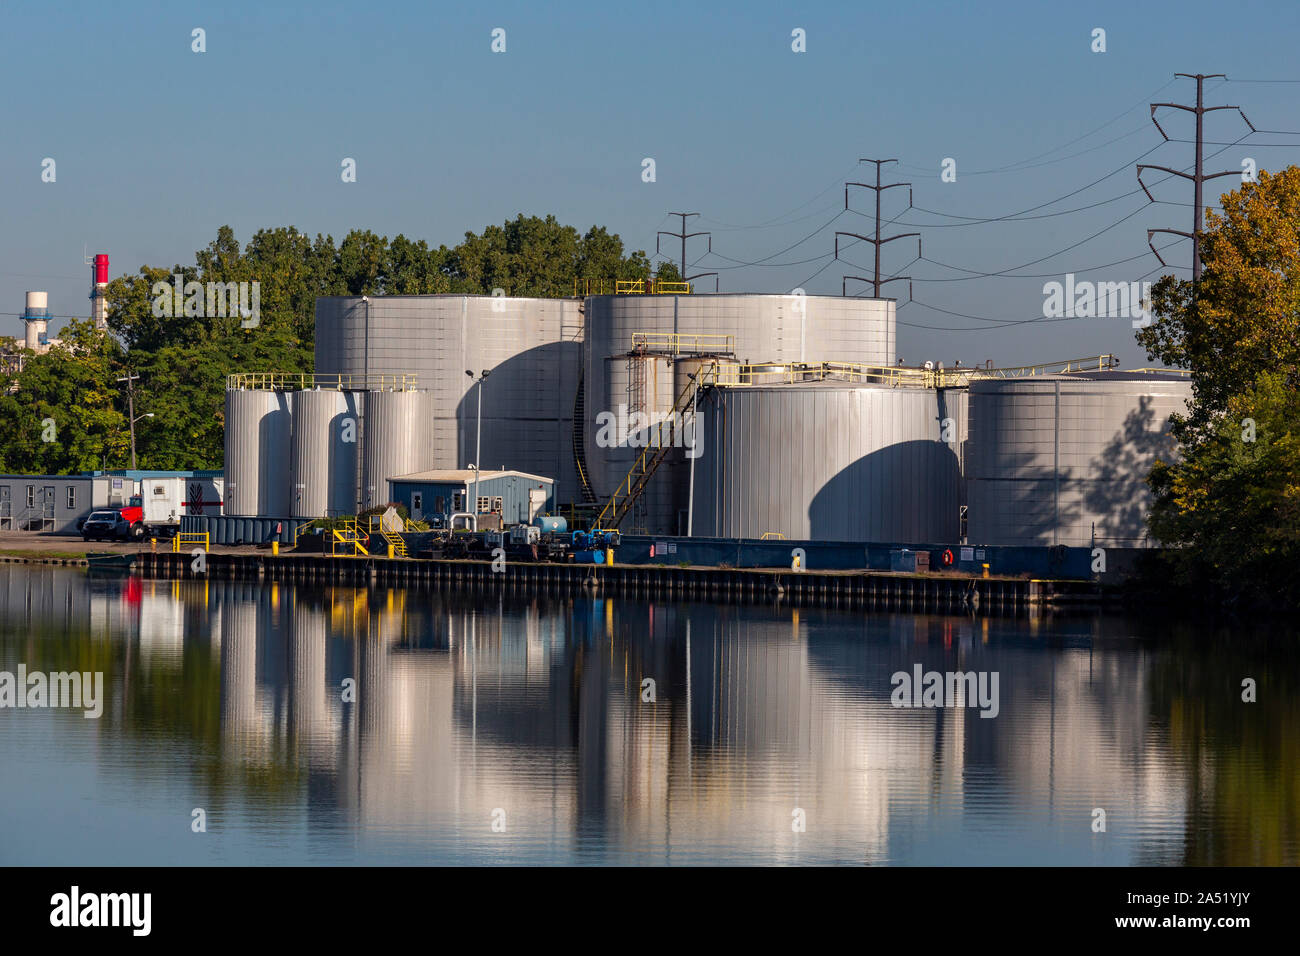 Dearborn, Michigan - Marine fuel storage tanks along the Rouge River at the Waterfront Petroleum Terminal Company. Stock Photo